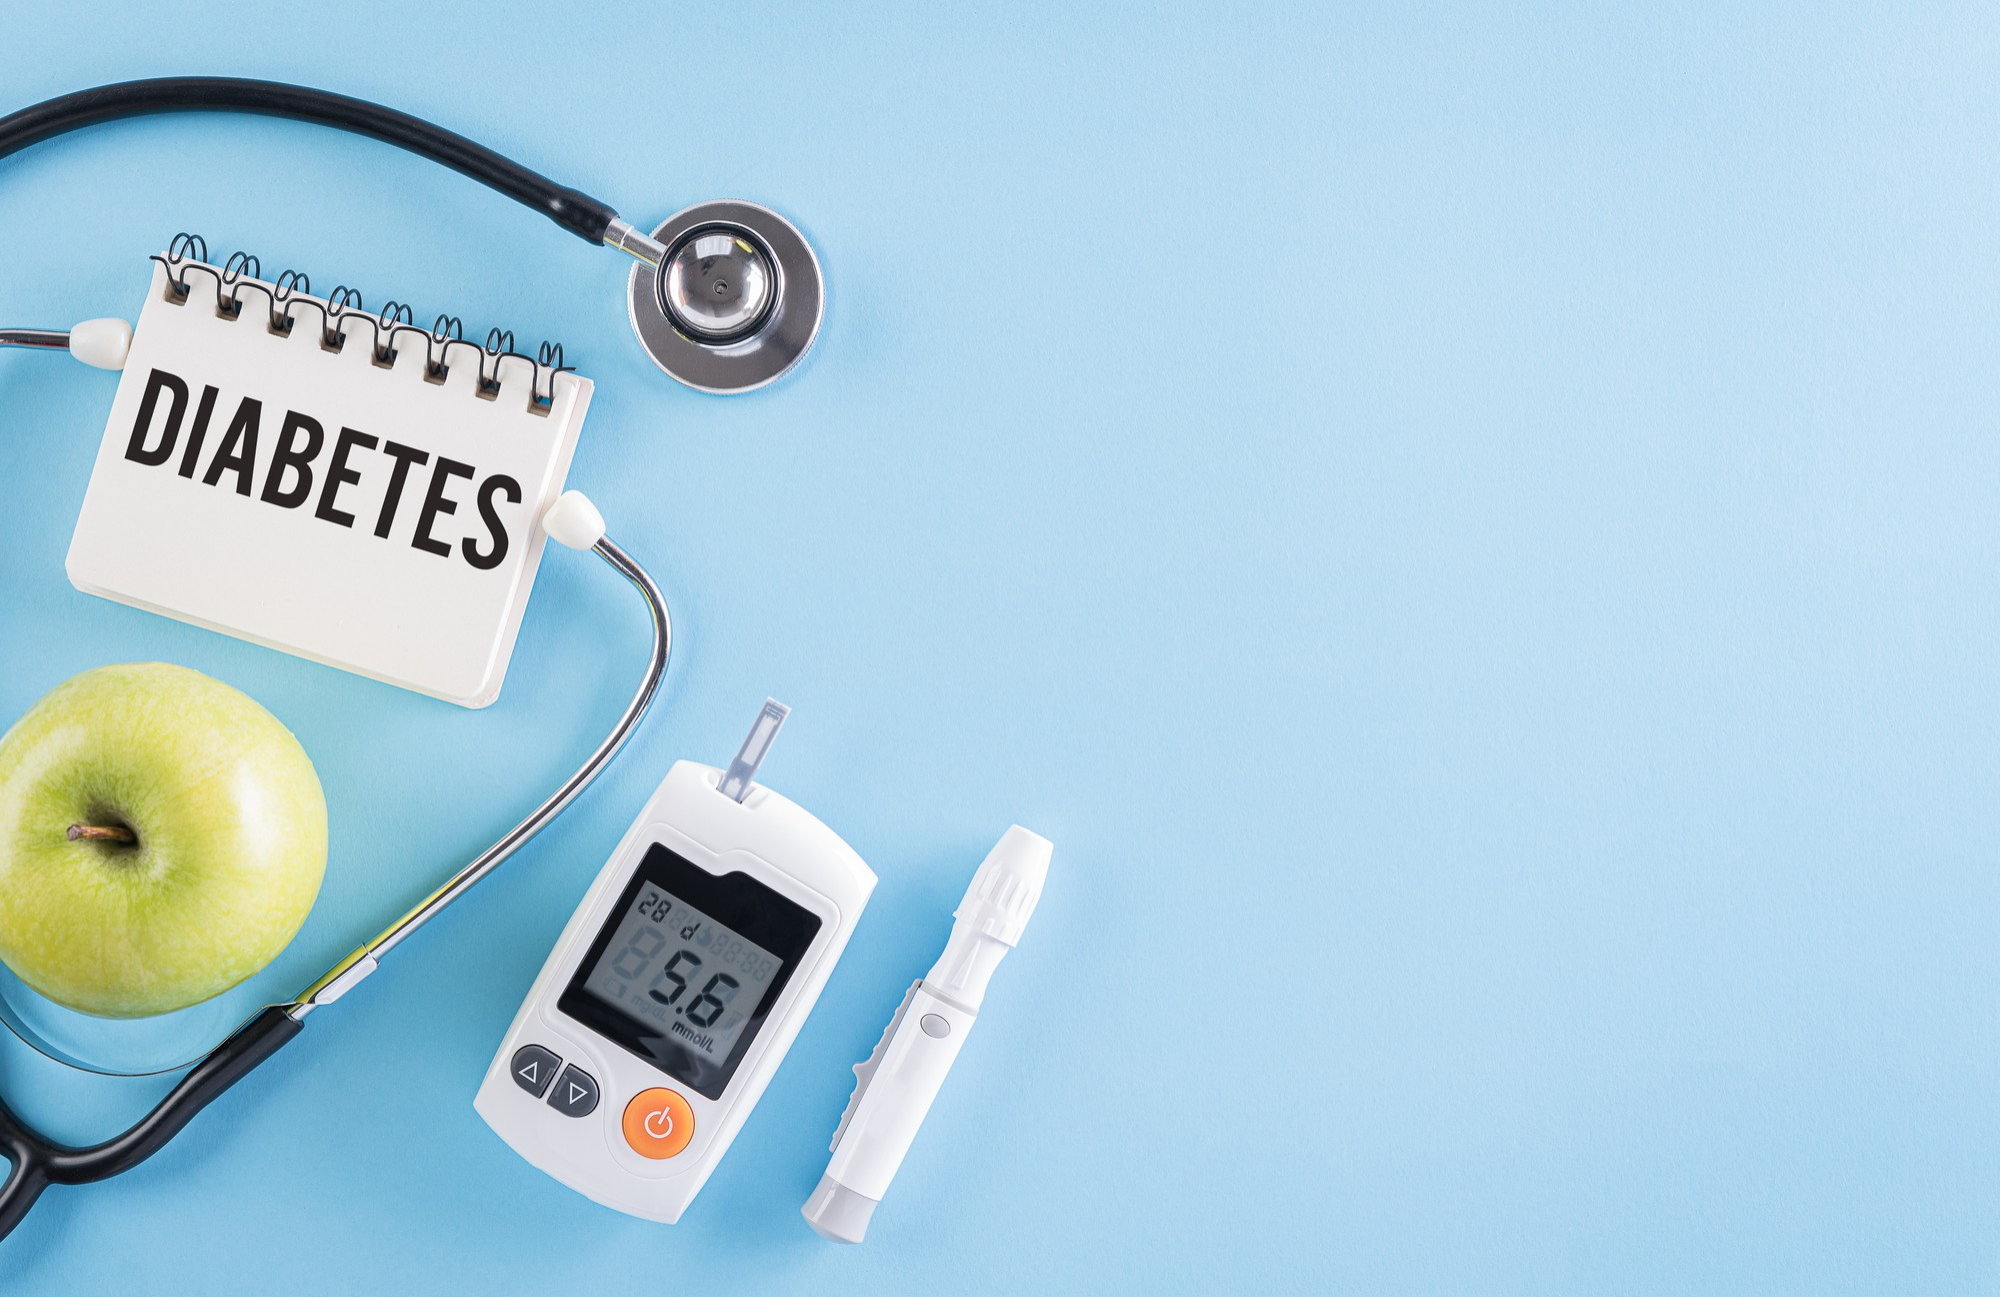 nhs-to-offer-tech-dubbed-artificial-pancreas-to-diabetes-patients-in-uk